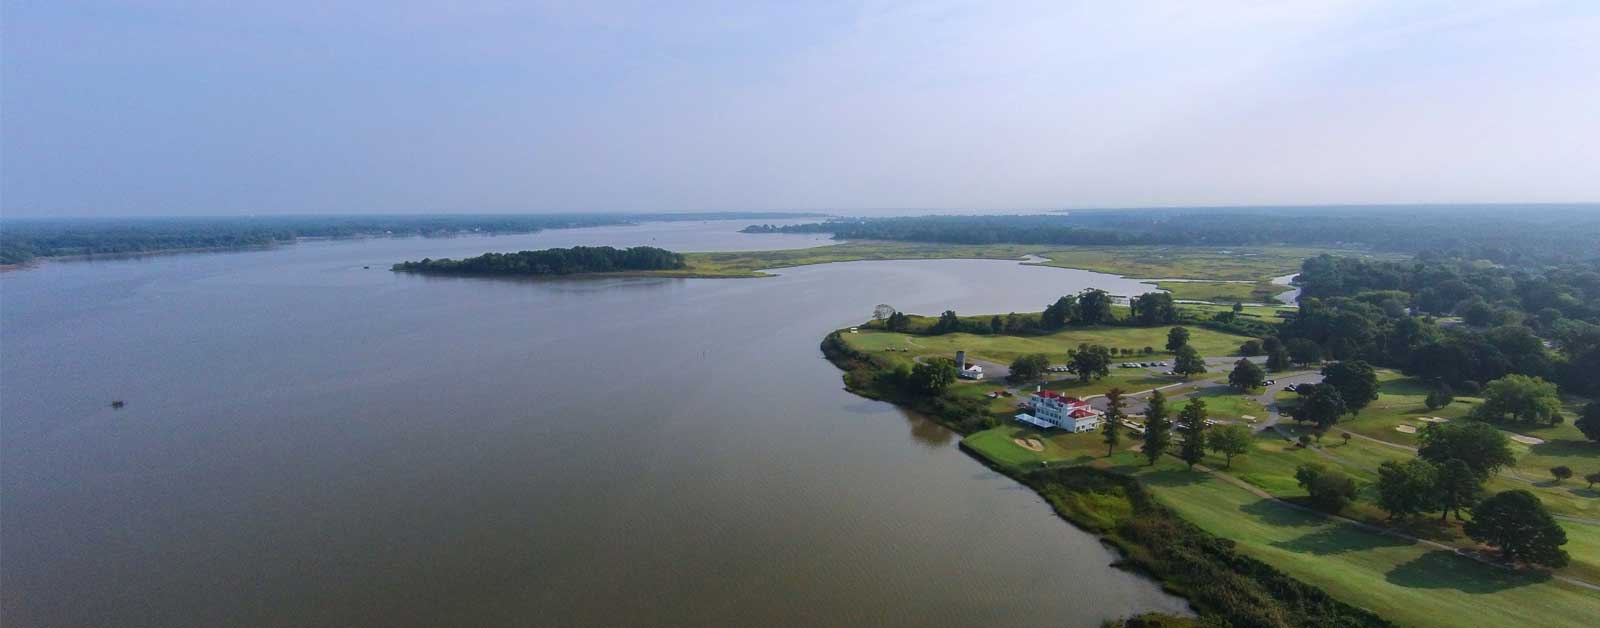 Aerial photo of the Obici House on the Nansemond River in Suffolk, Virginia